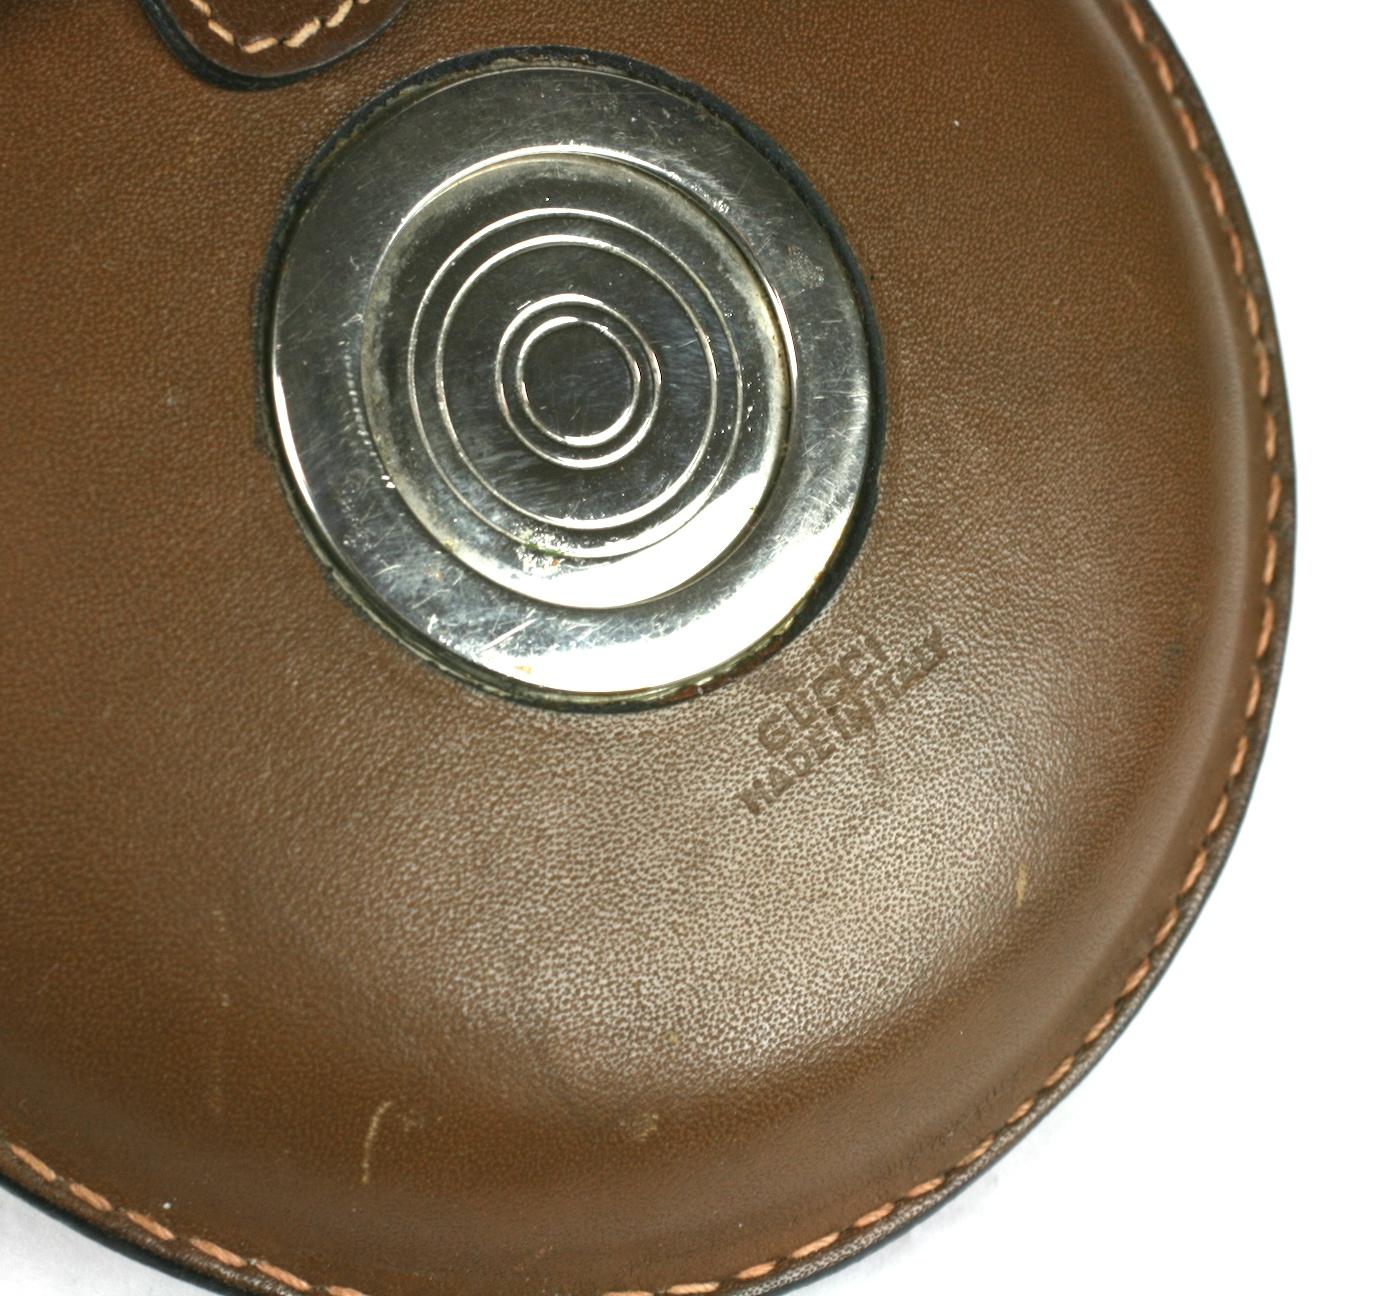 Gucci Leather Clad Flask In Good Condition For Sale In New York, NY